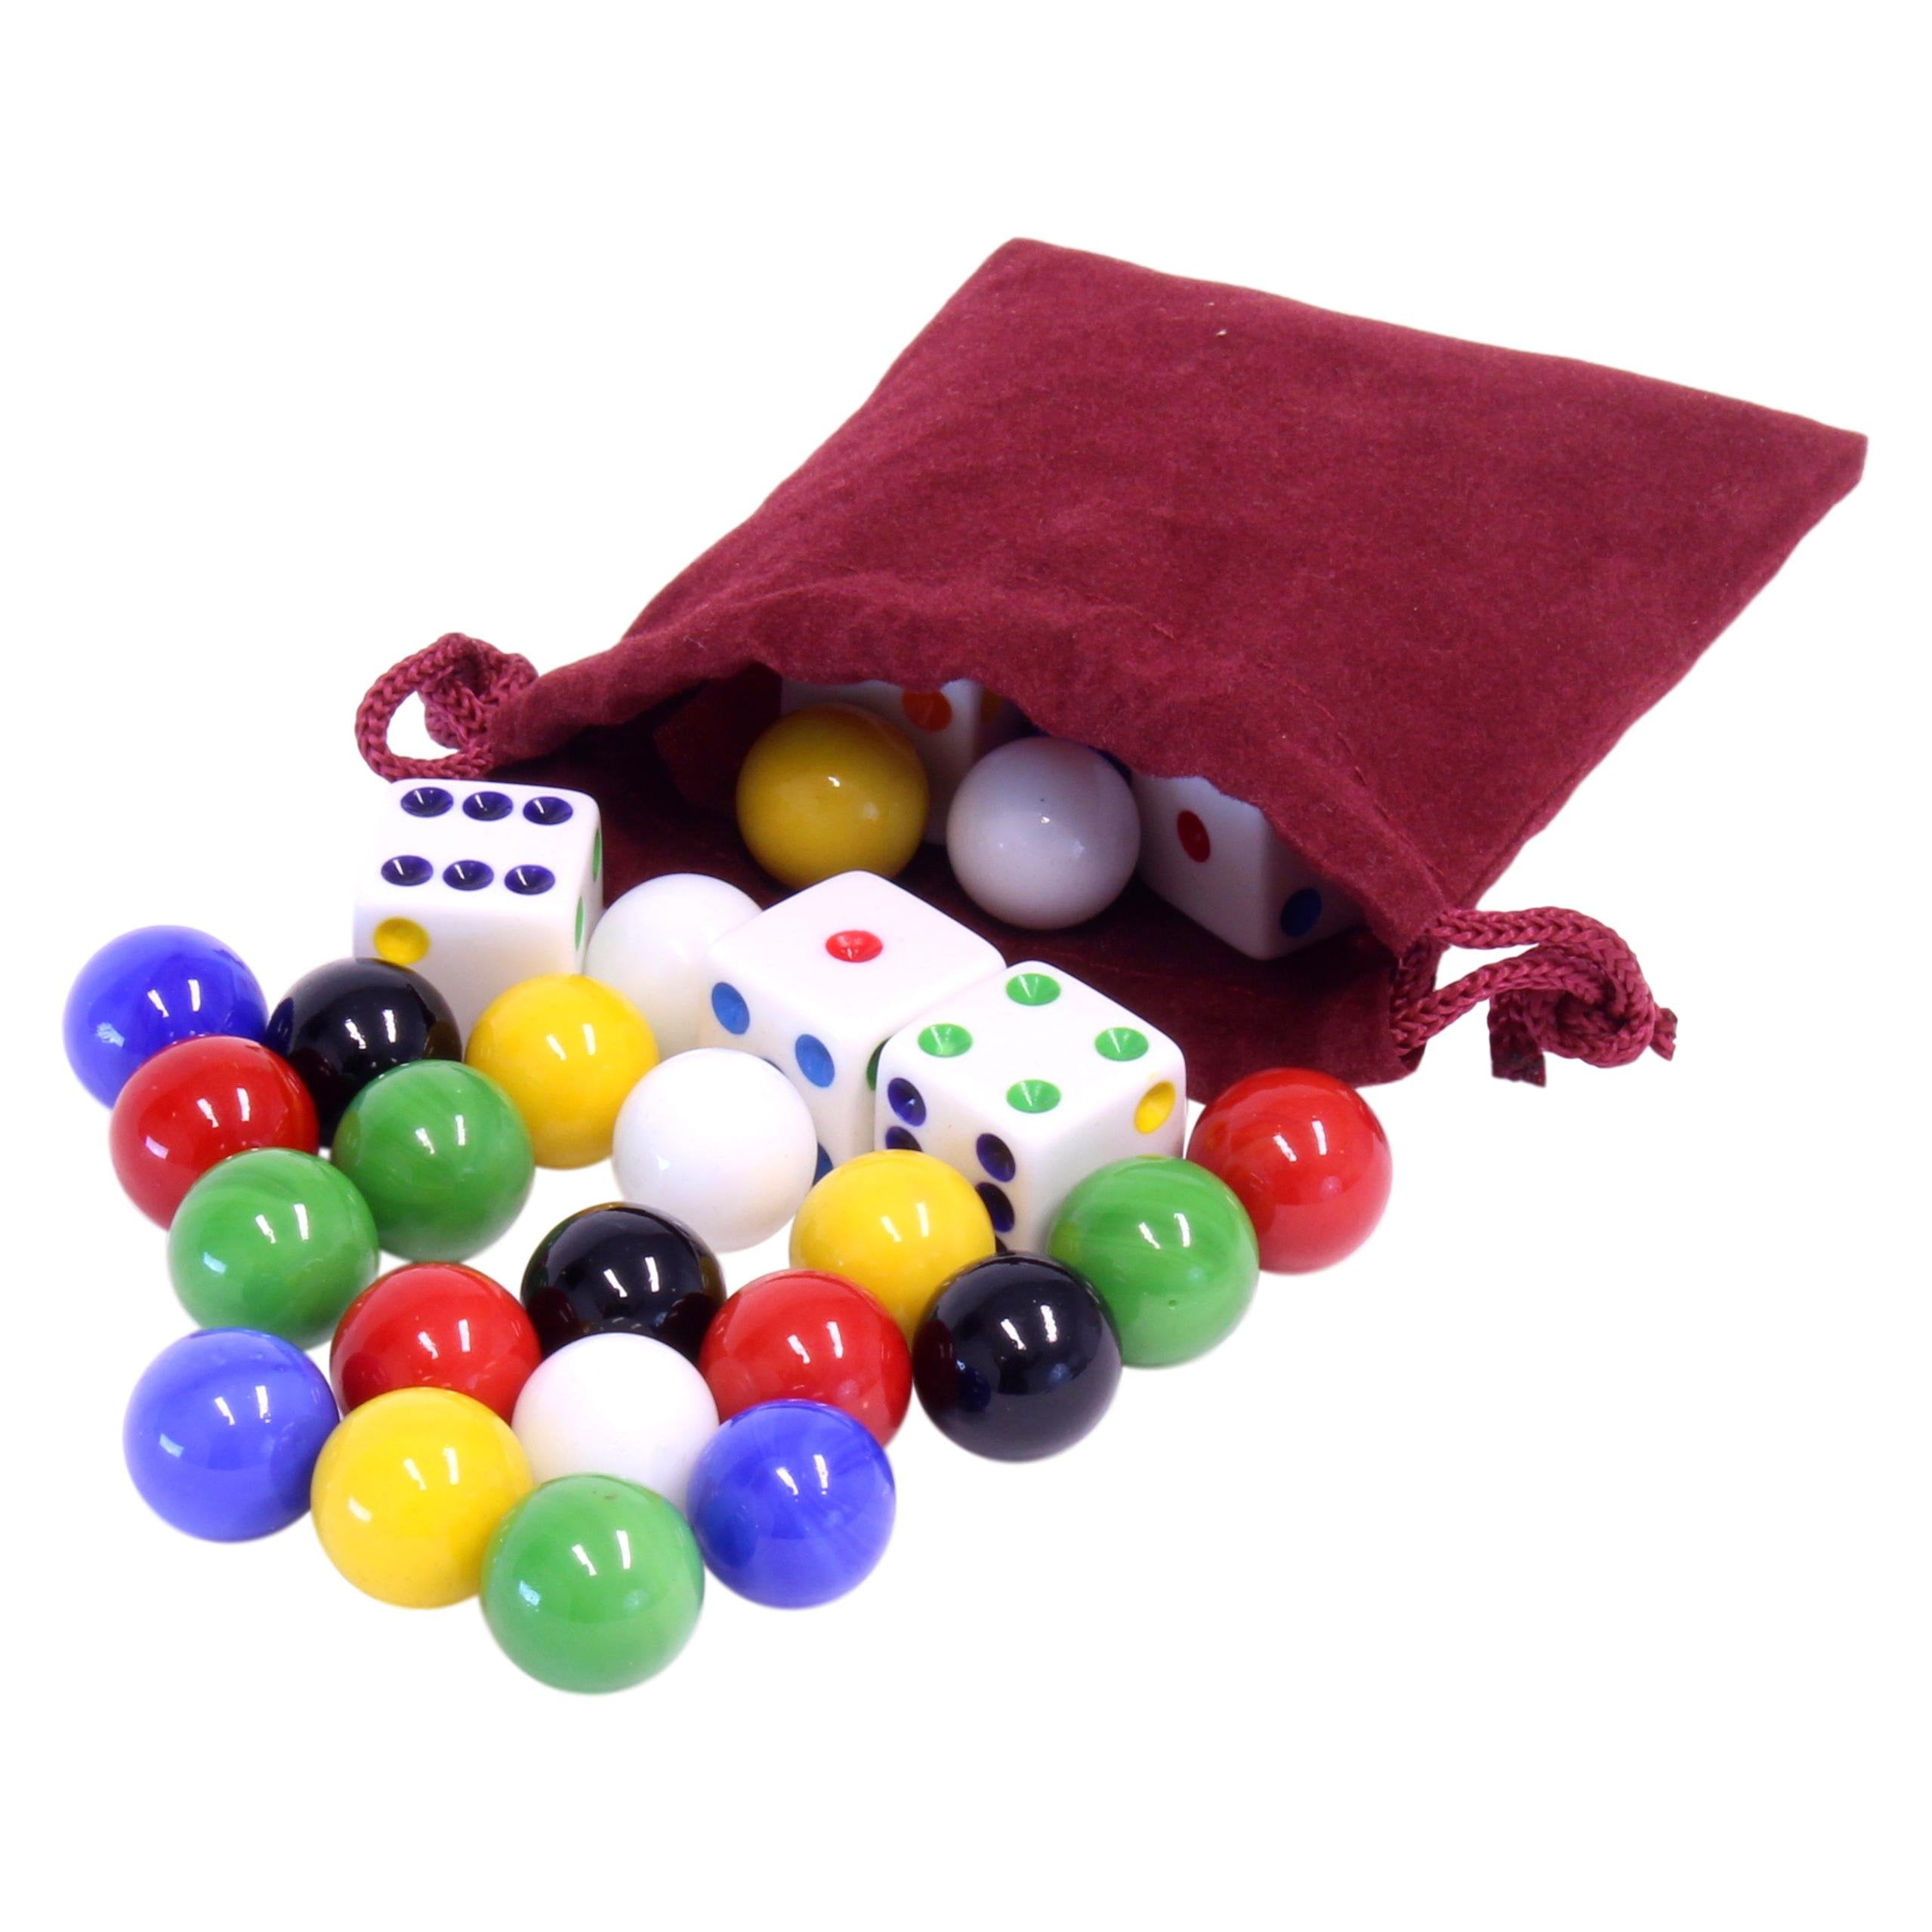 10 x "ICE" GAME PLAY MARBLES 9/16" NEW 